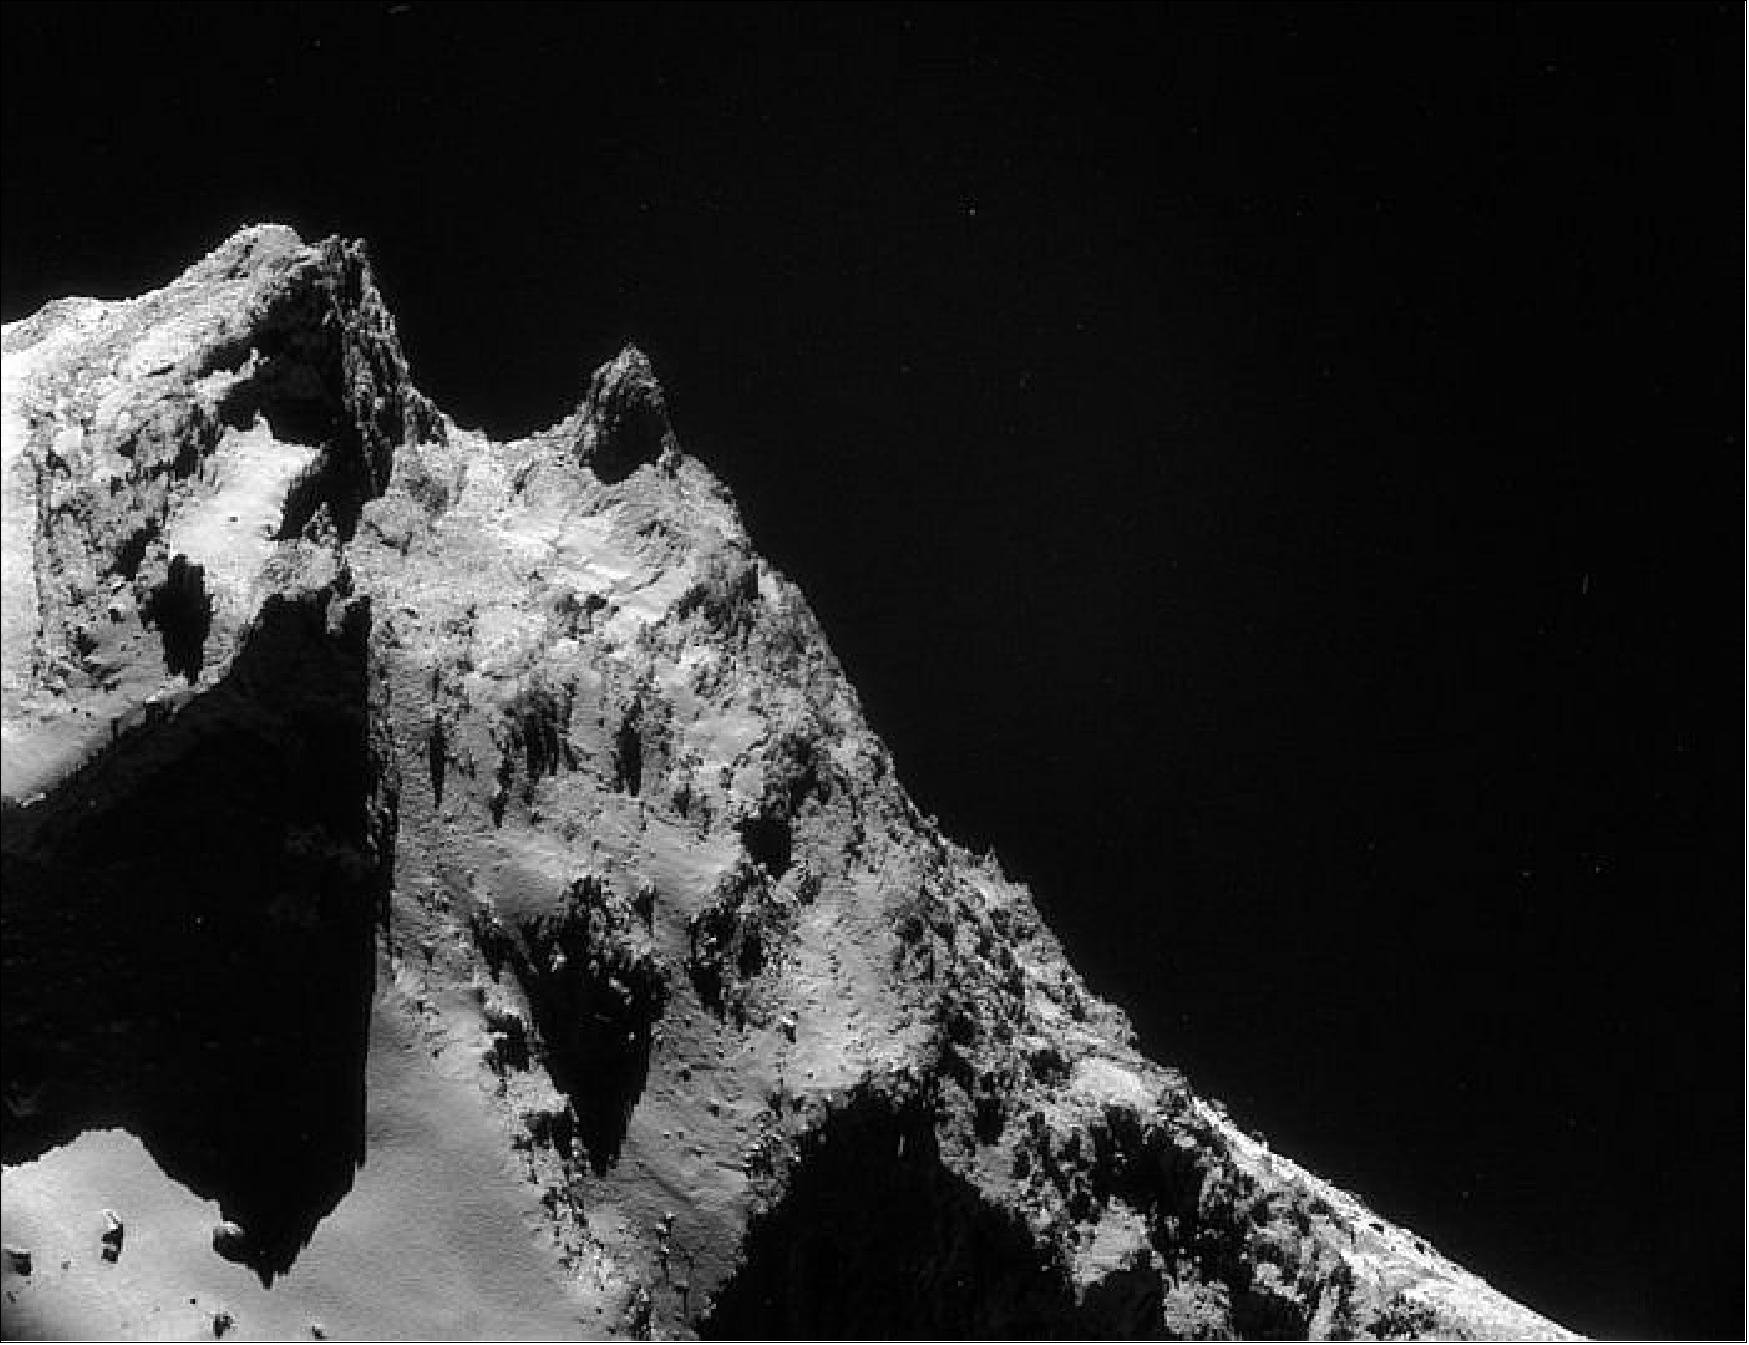 Figure 112: Image of the Anuket region and its surroundings on Comet 67P/Churyumov–Gerasimenko, acquired on March 13, 2016 with the NAVCAM from a distance of 17 km (image credit: ESA/Rosetta/NAVCAM – CC BY-SA IGO 3.0)